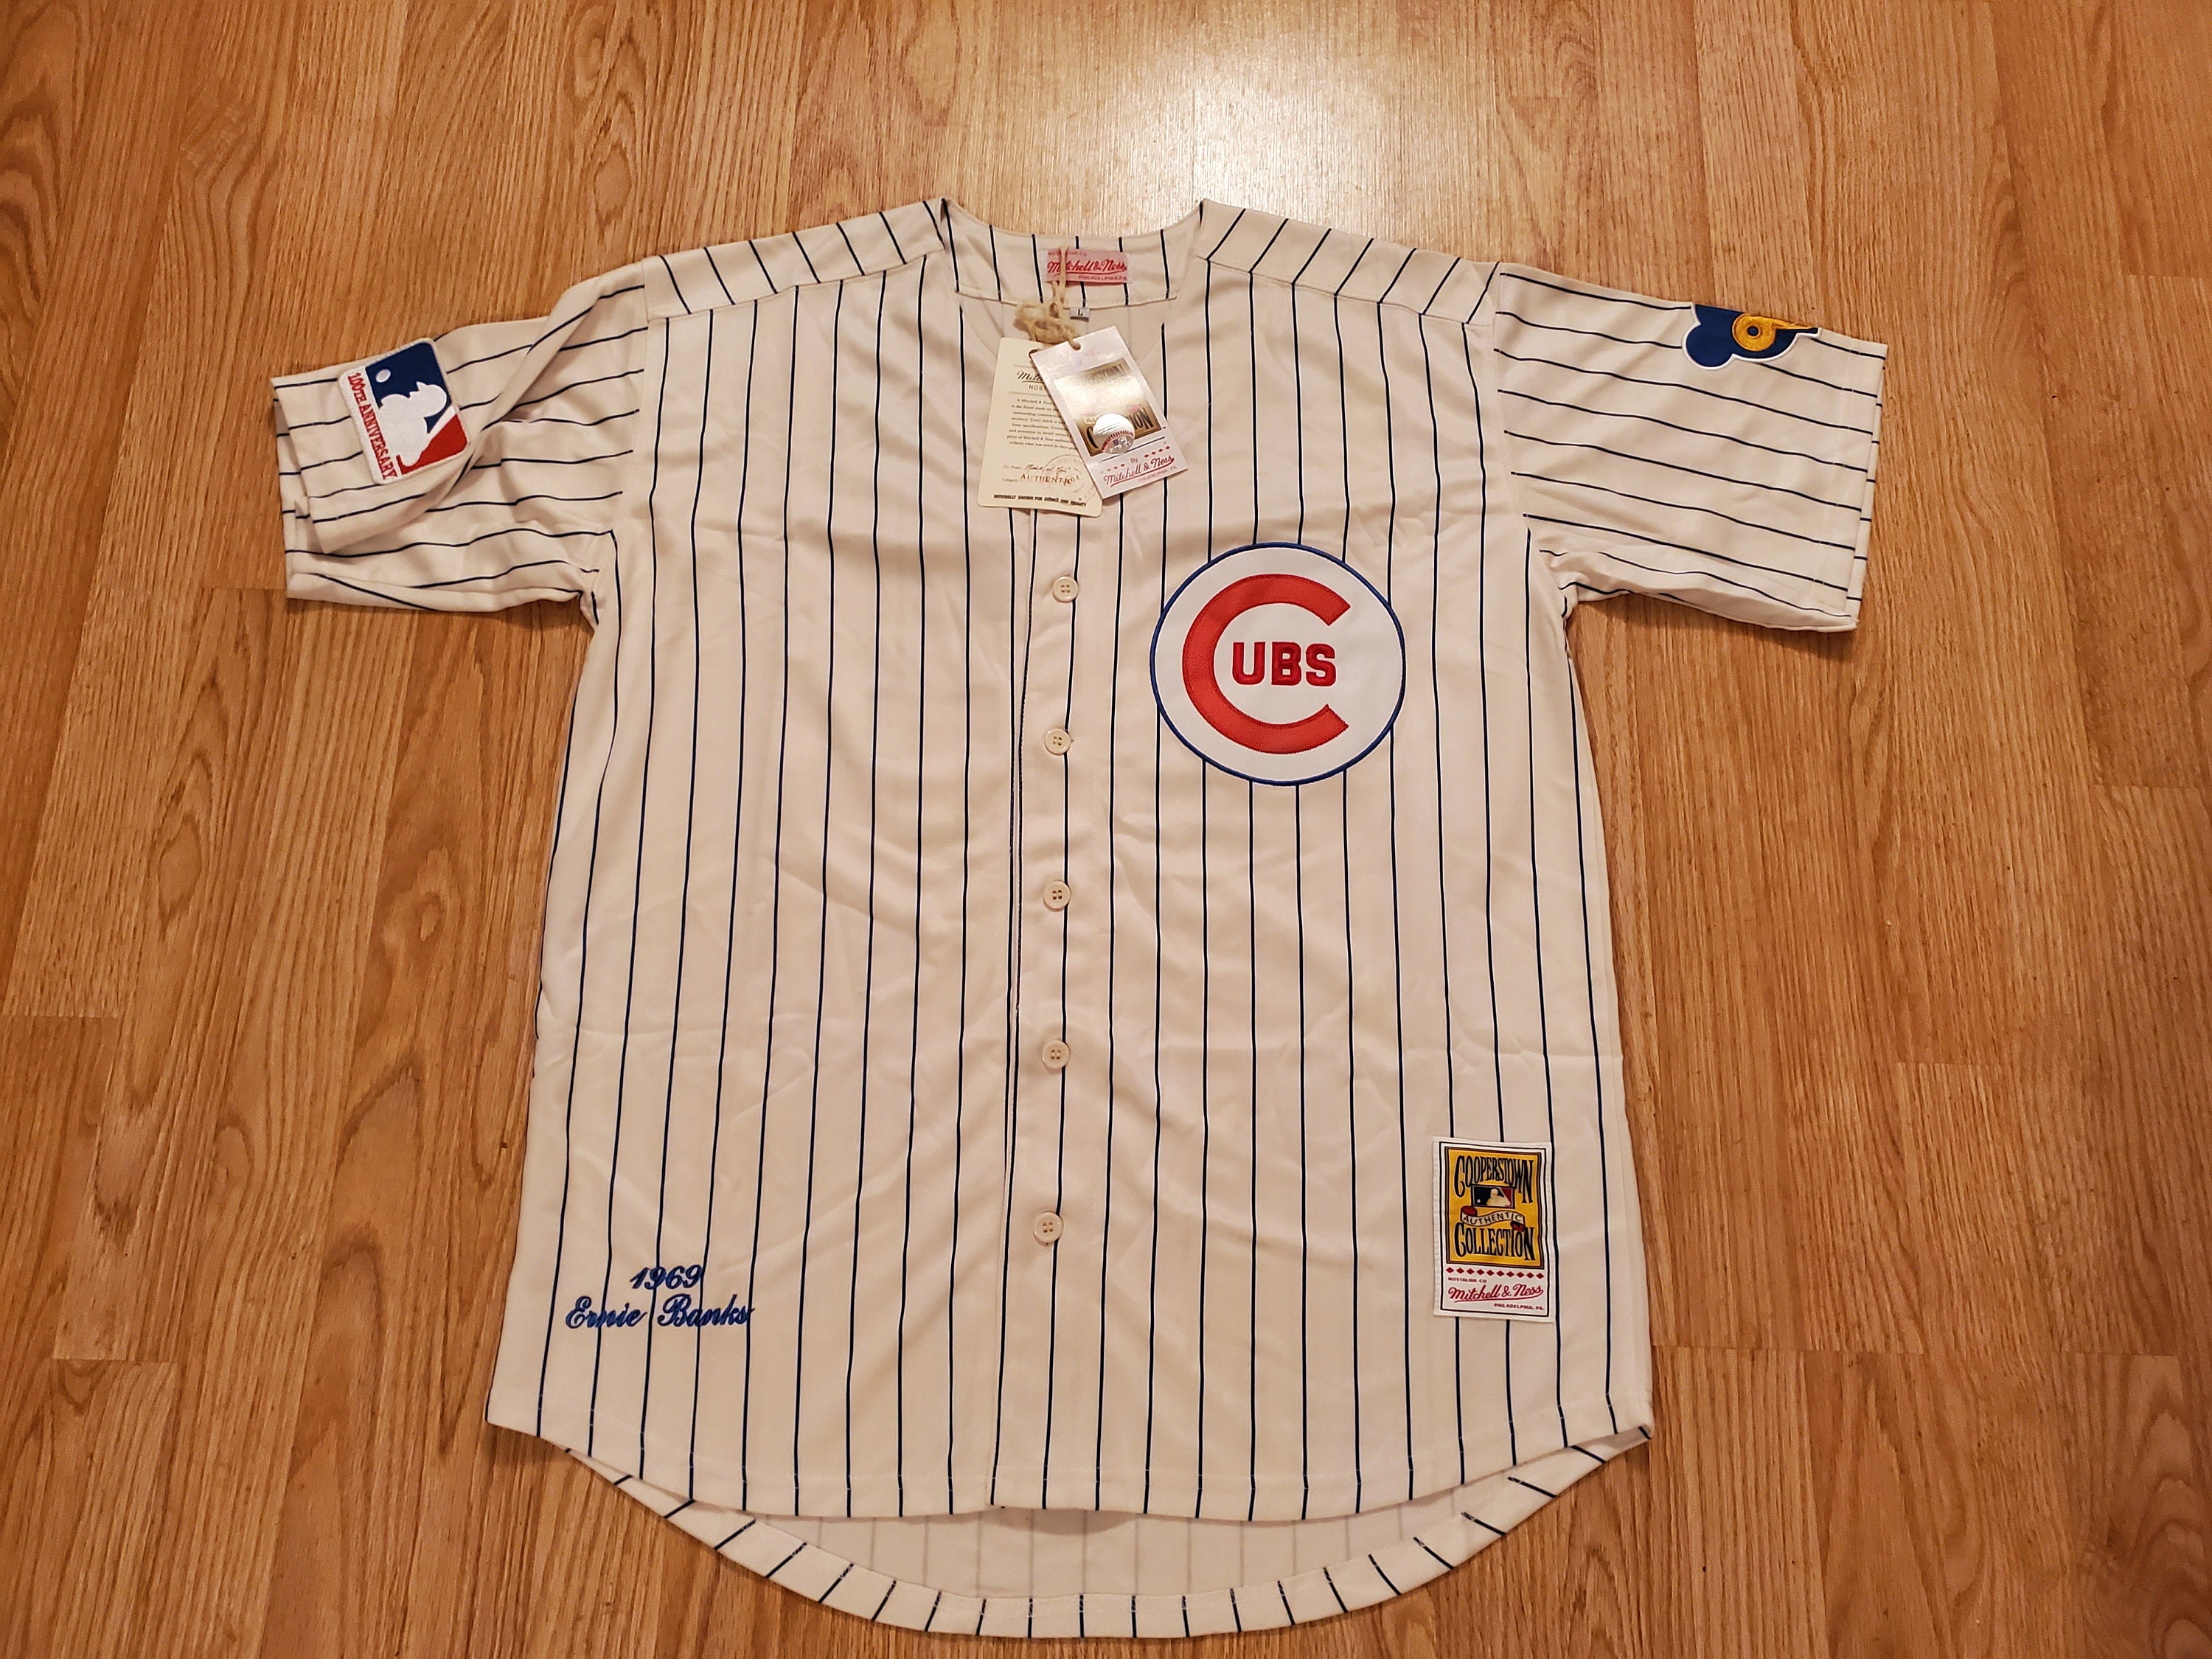 mitchell and ness ernie banks jersey